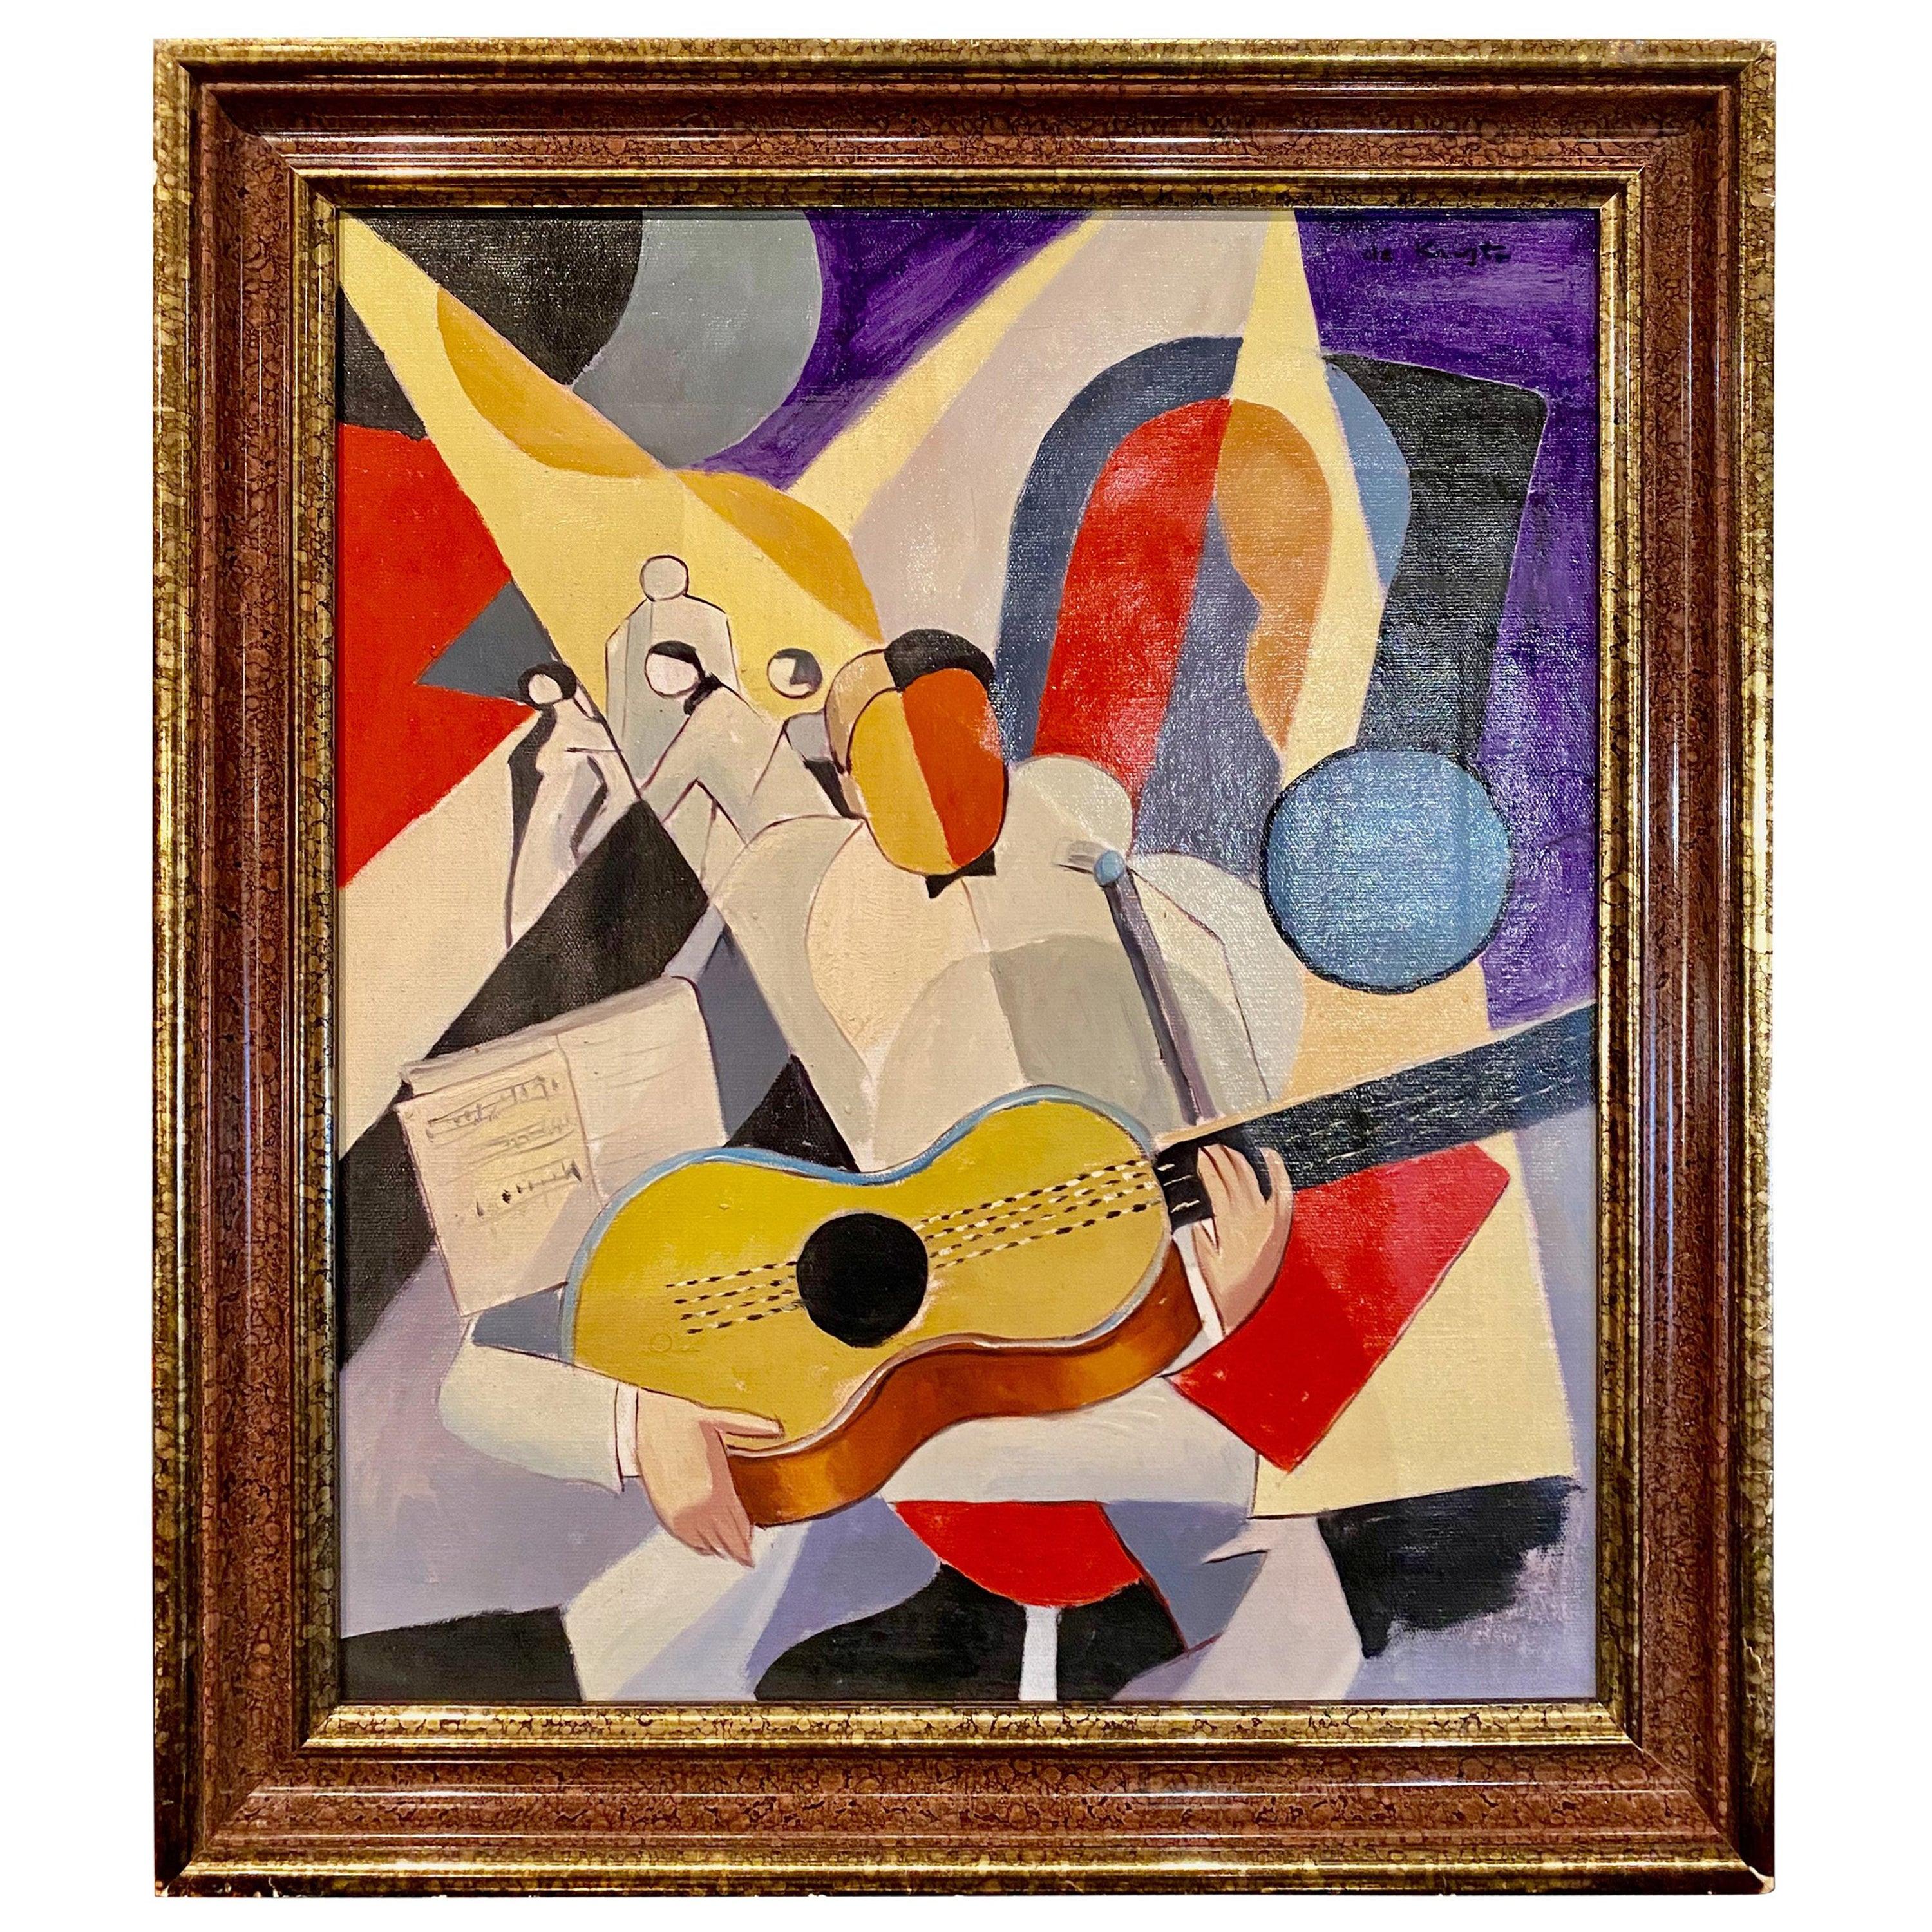 Art Deco cubist painting of a guitar player by Bela De Kristo. Strong cubist style and colors, original and of the period. The image representing a solo guitarist with dancers in the background and sheet music adds to the overall feeling and the